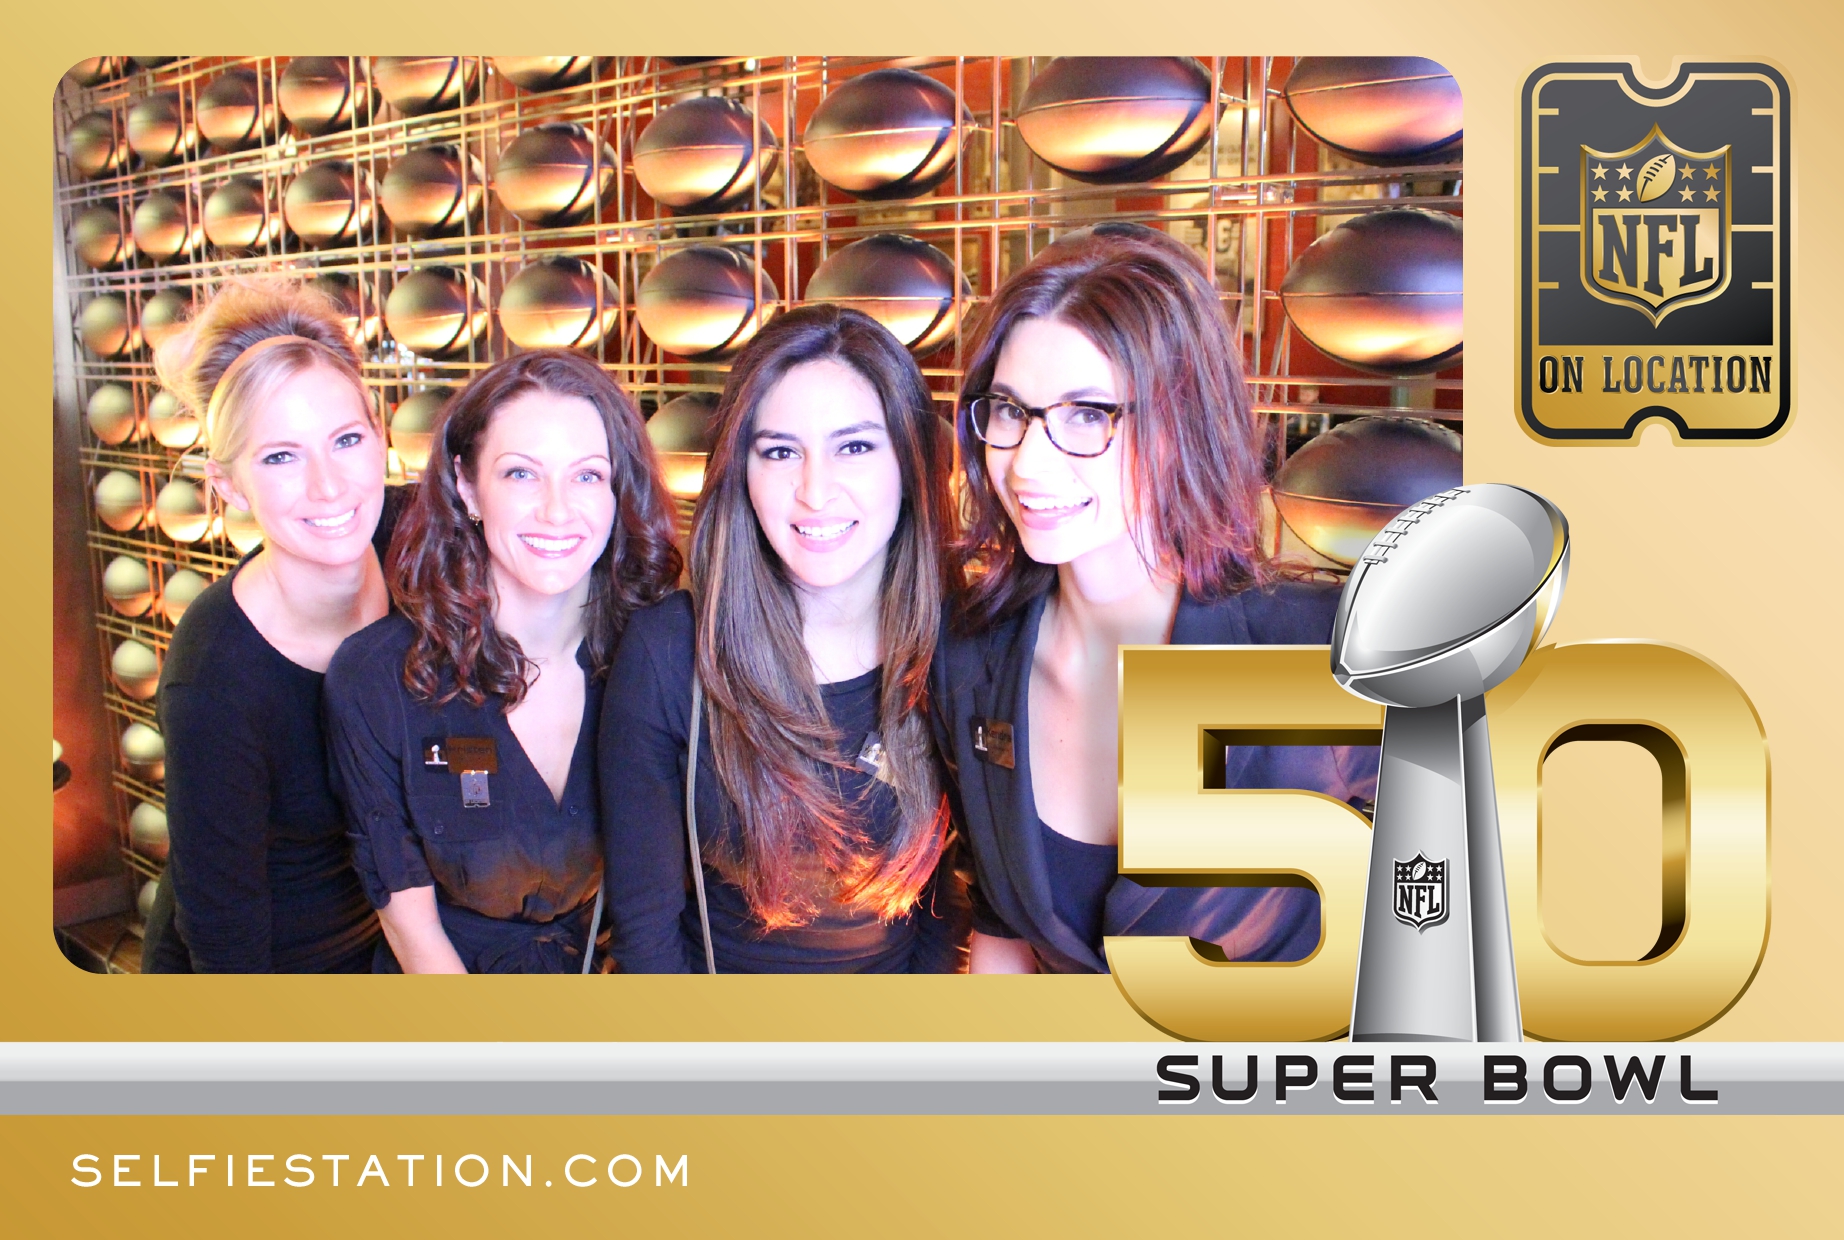 Super Bowl 50 attendees commemmorate the big game with a Selfie Station photo.